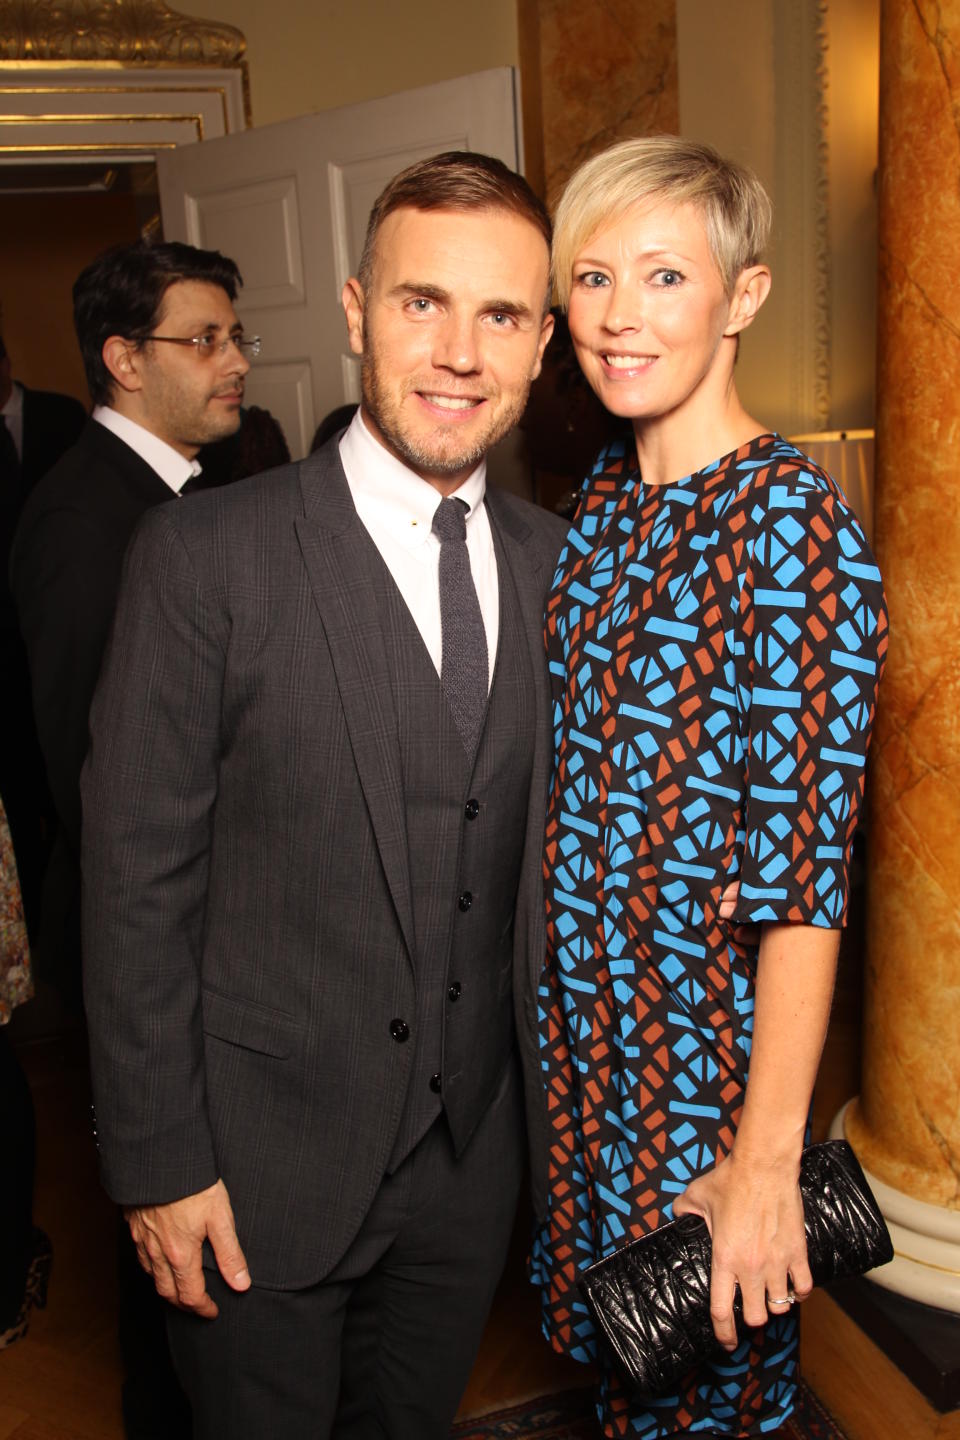 LONDON, ENGLAND - JANUARY 10: Gary Barlow and his wife Dawn attend a celebratory reception for BBC Children In Need hosted by Samantha Cameron at 10 Downing Street on January 10, 2012 in London, United Kingdom. (Photo by Dave J Hogan/Getty Images)